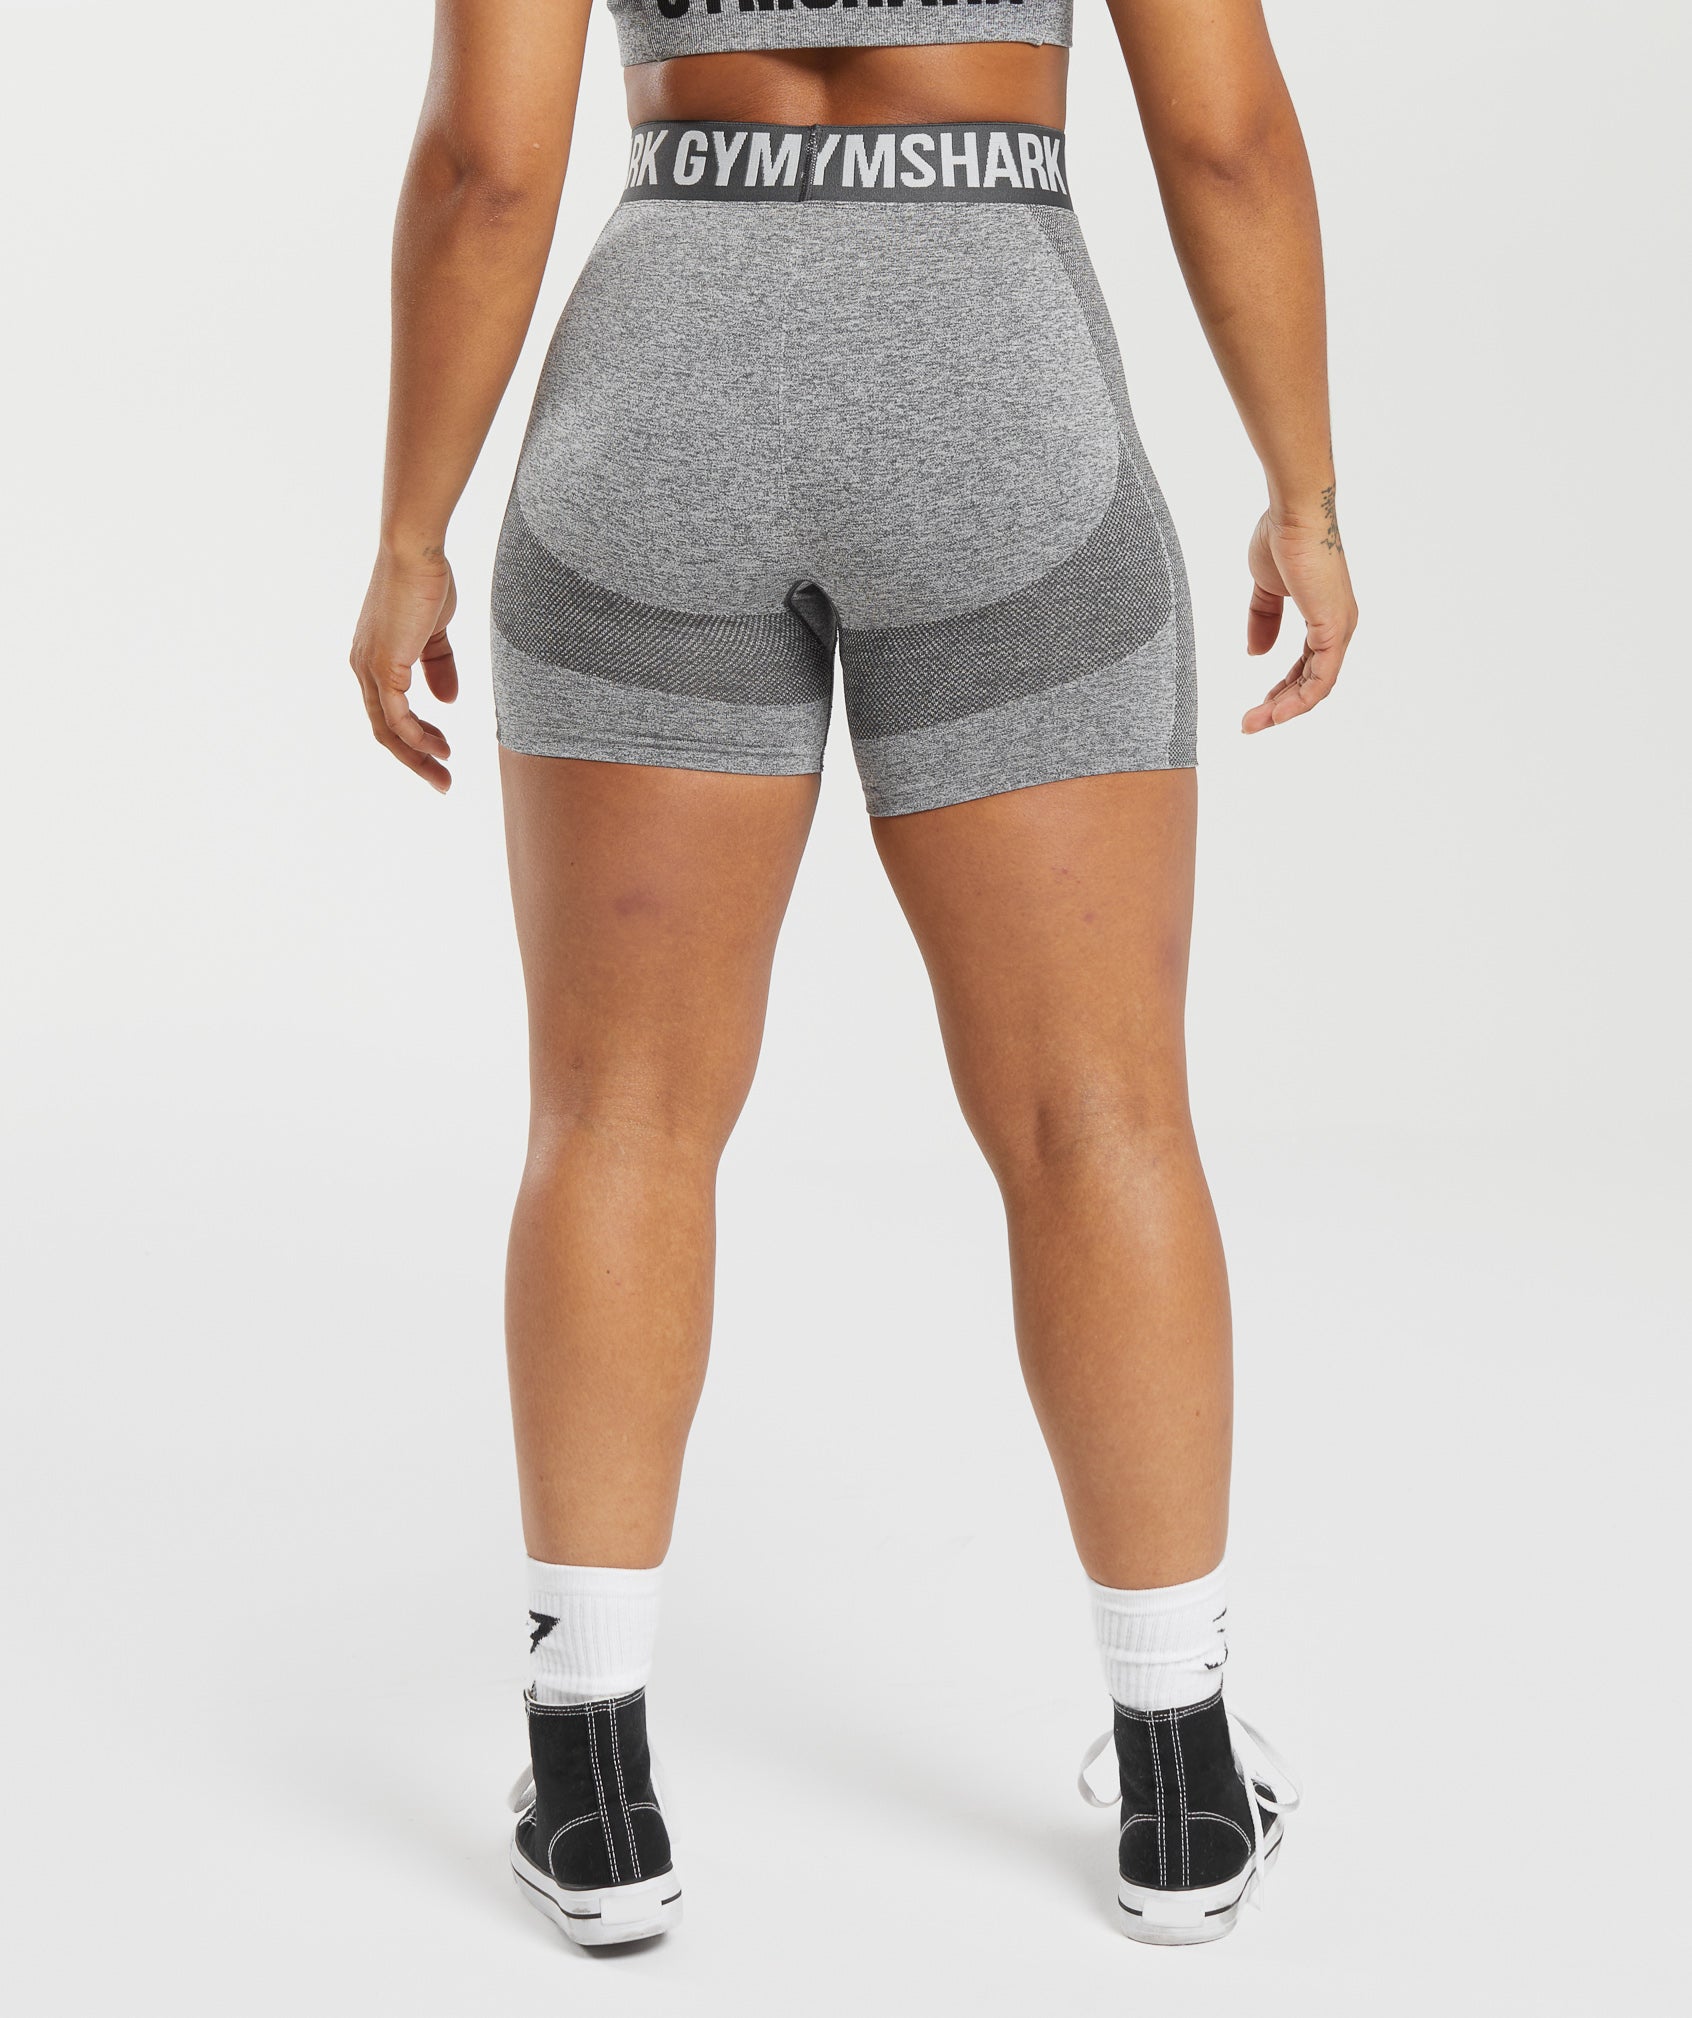 Flex Shorts in Charcoal Marl - view 2